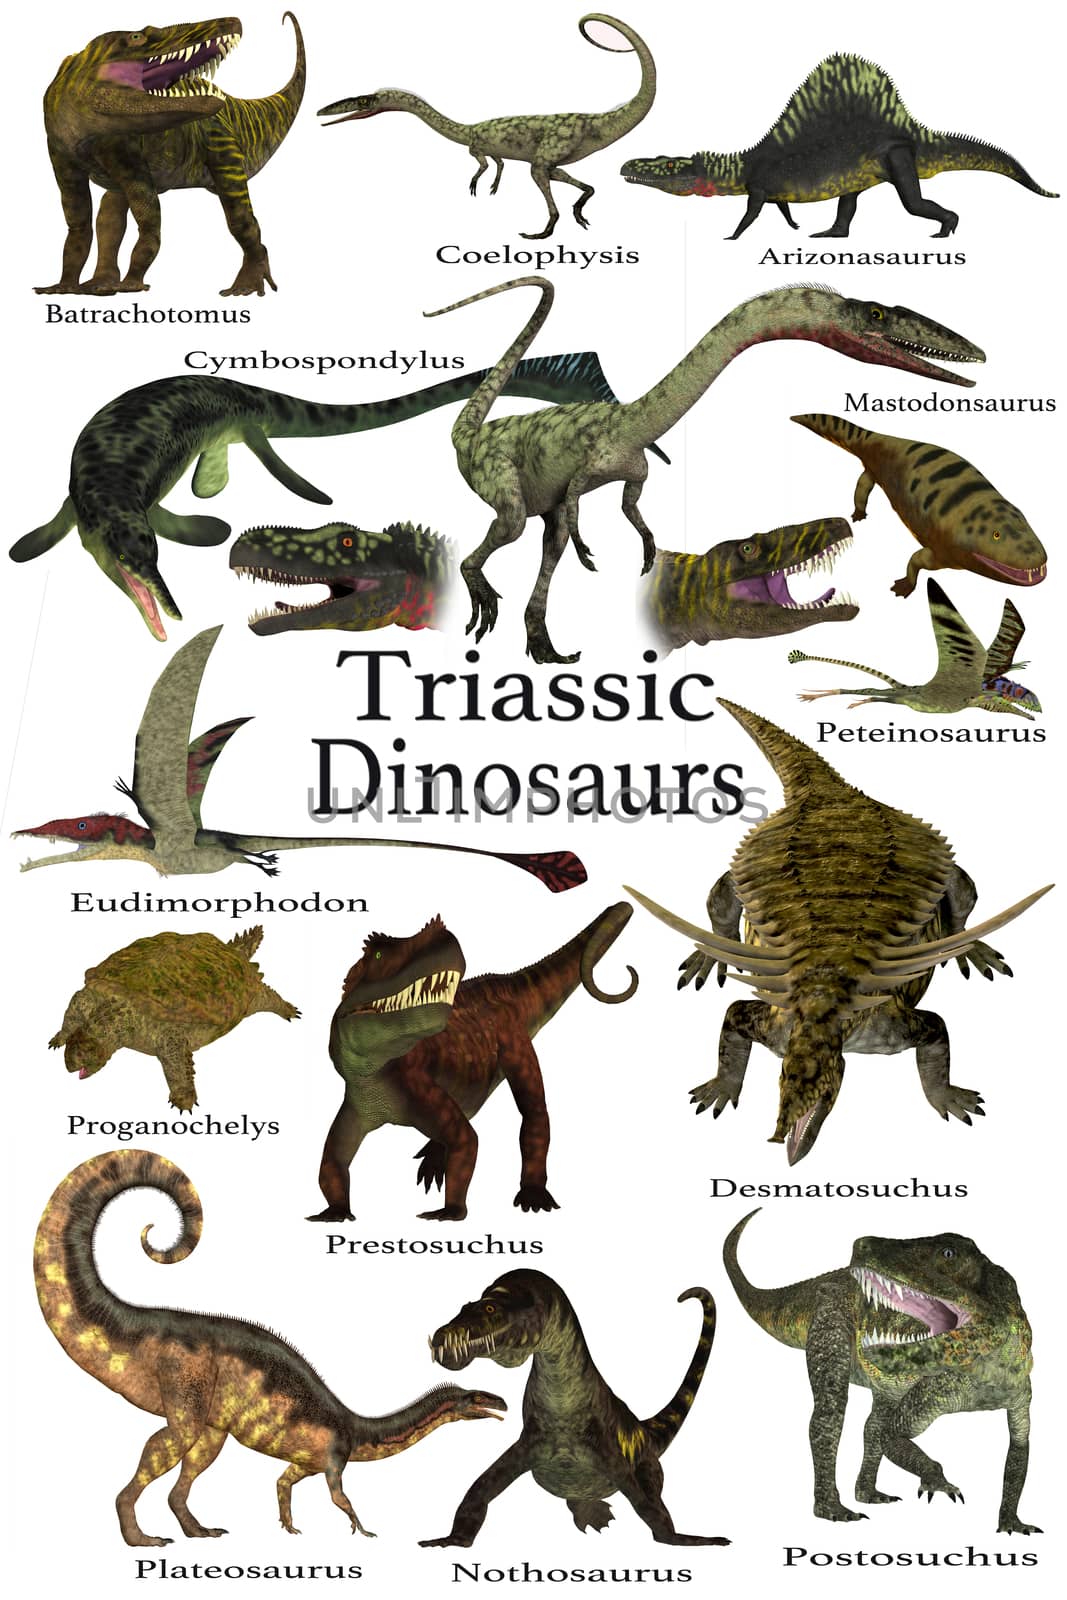 A collection of various dinosaur and marine animals that lived during the Triassic Period of Earth's history.